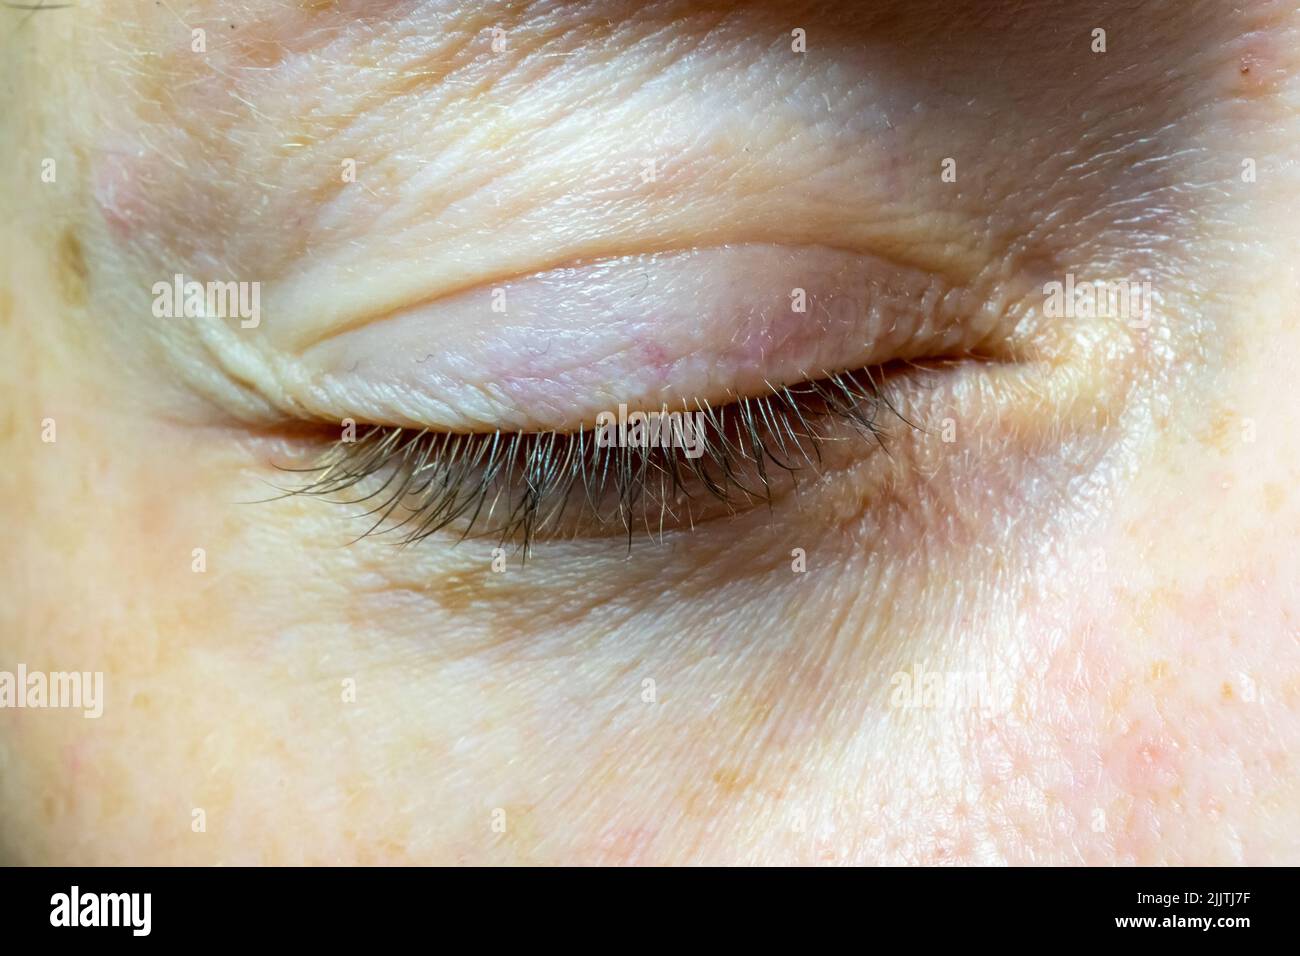 Woman's closed eye close-up. Problematic skin near the eye Stock Photo